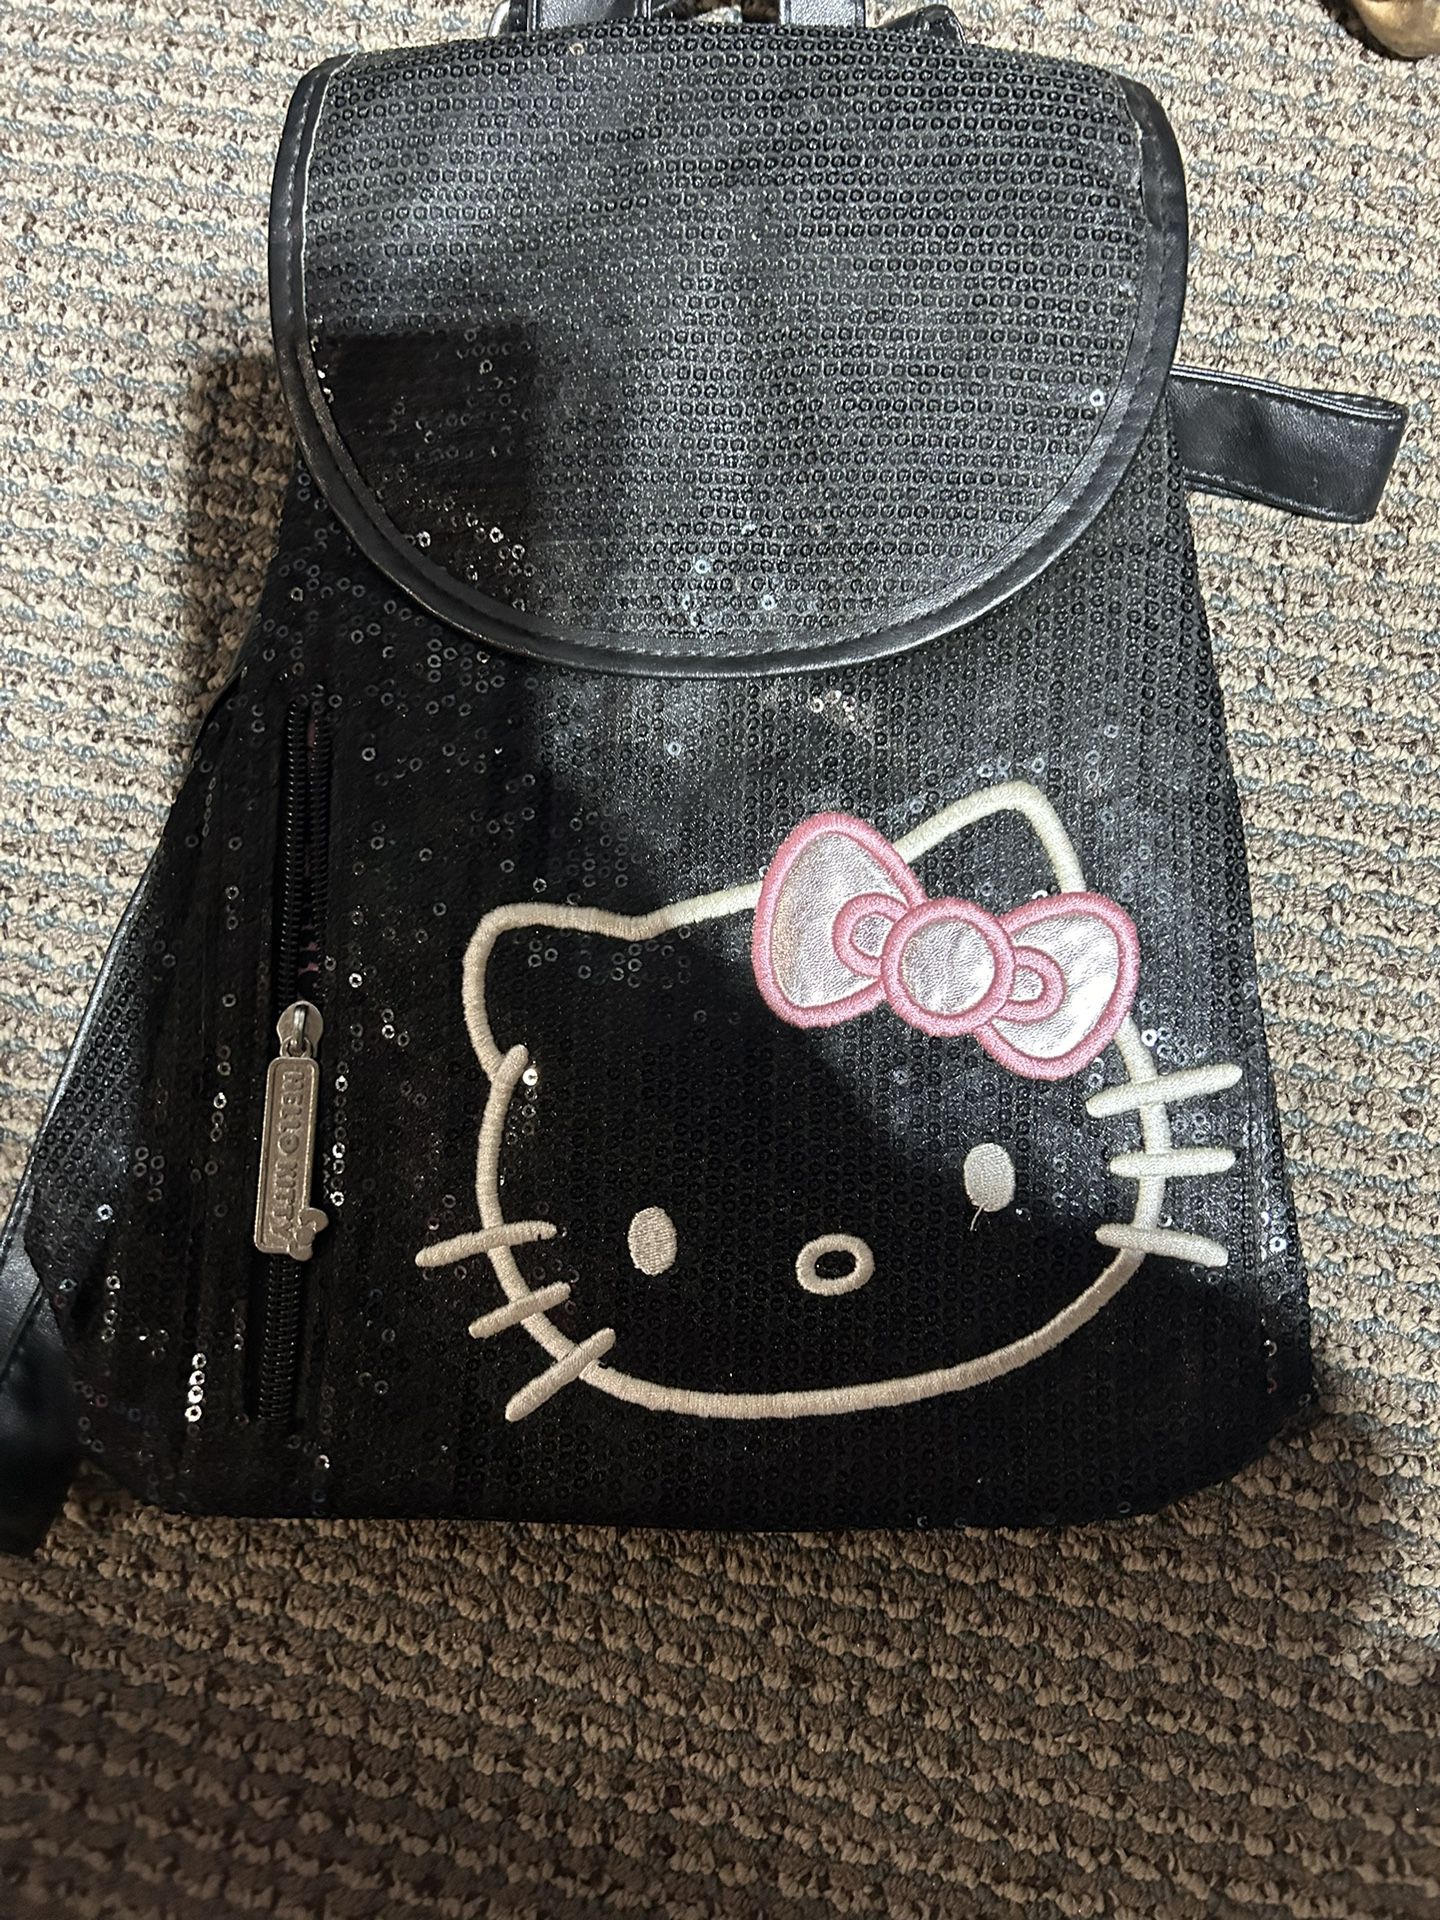 Authentic Hello Kitty Backpack 